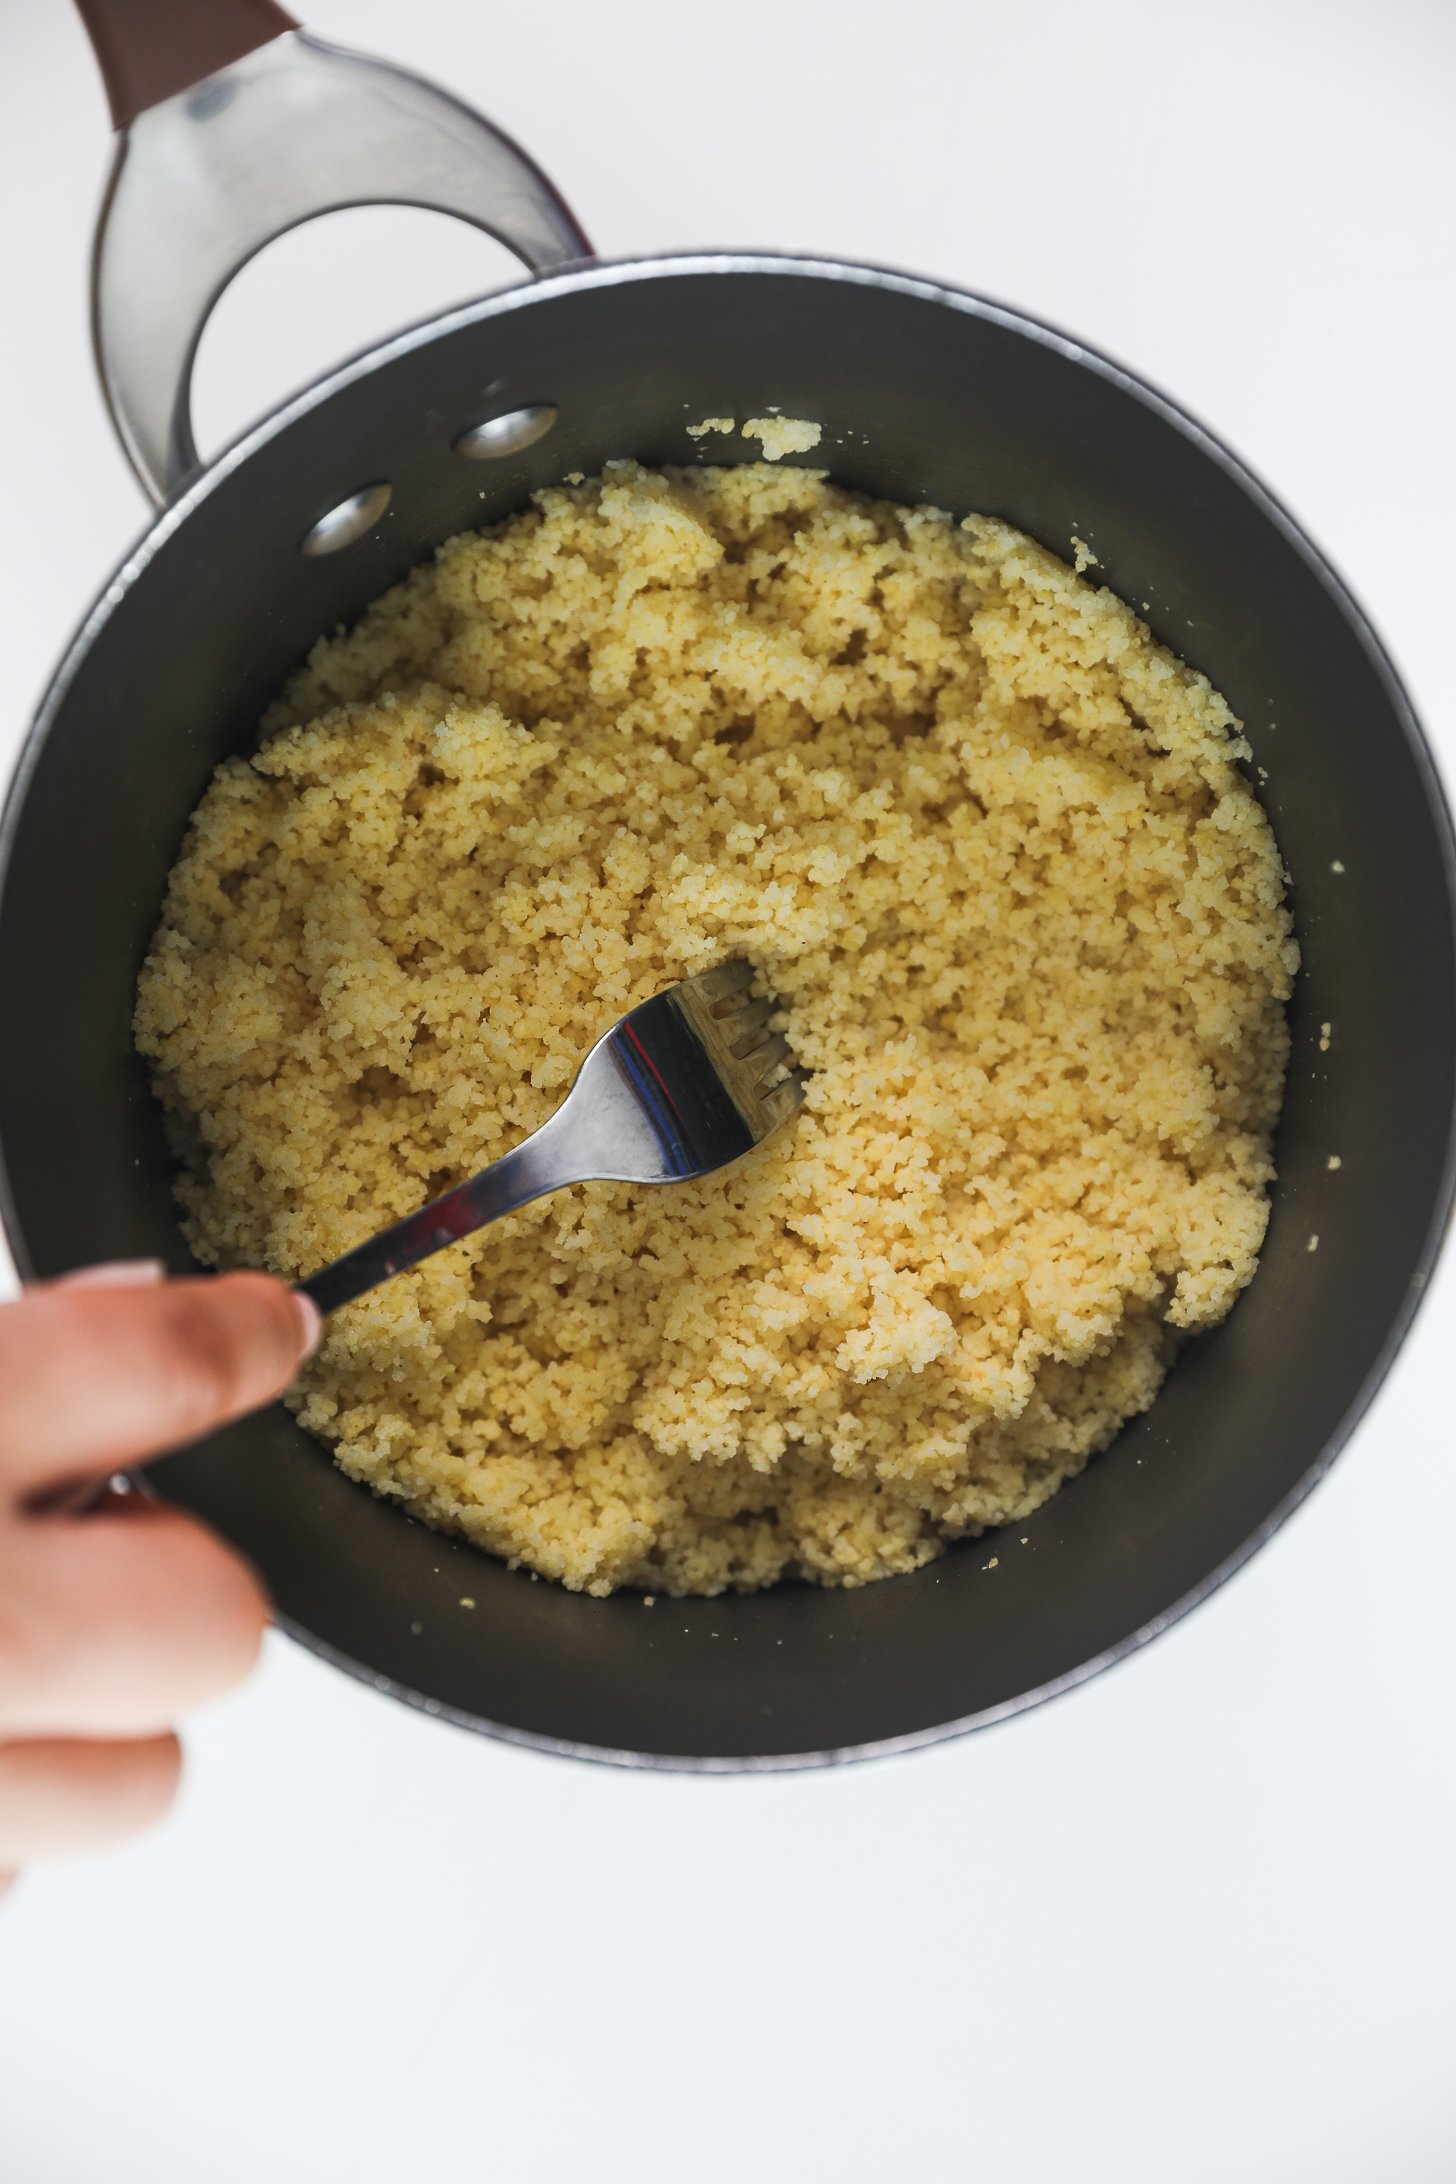 A hand holding a fork fluffing cooked couscous in a saucepan.